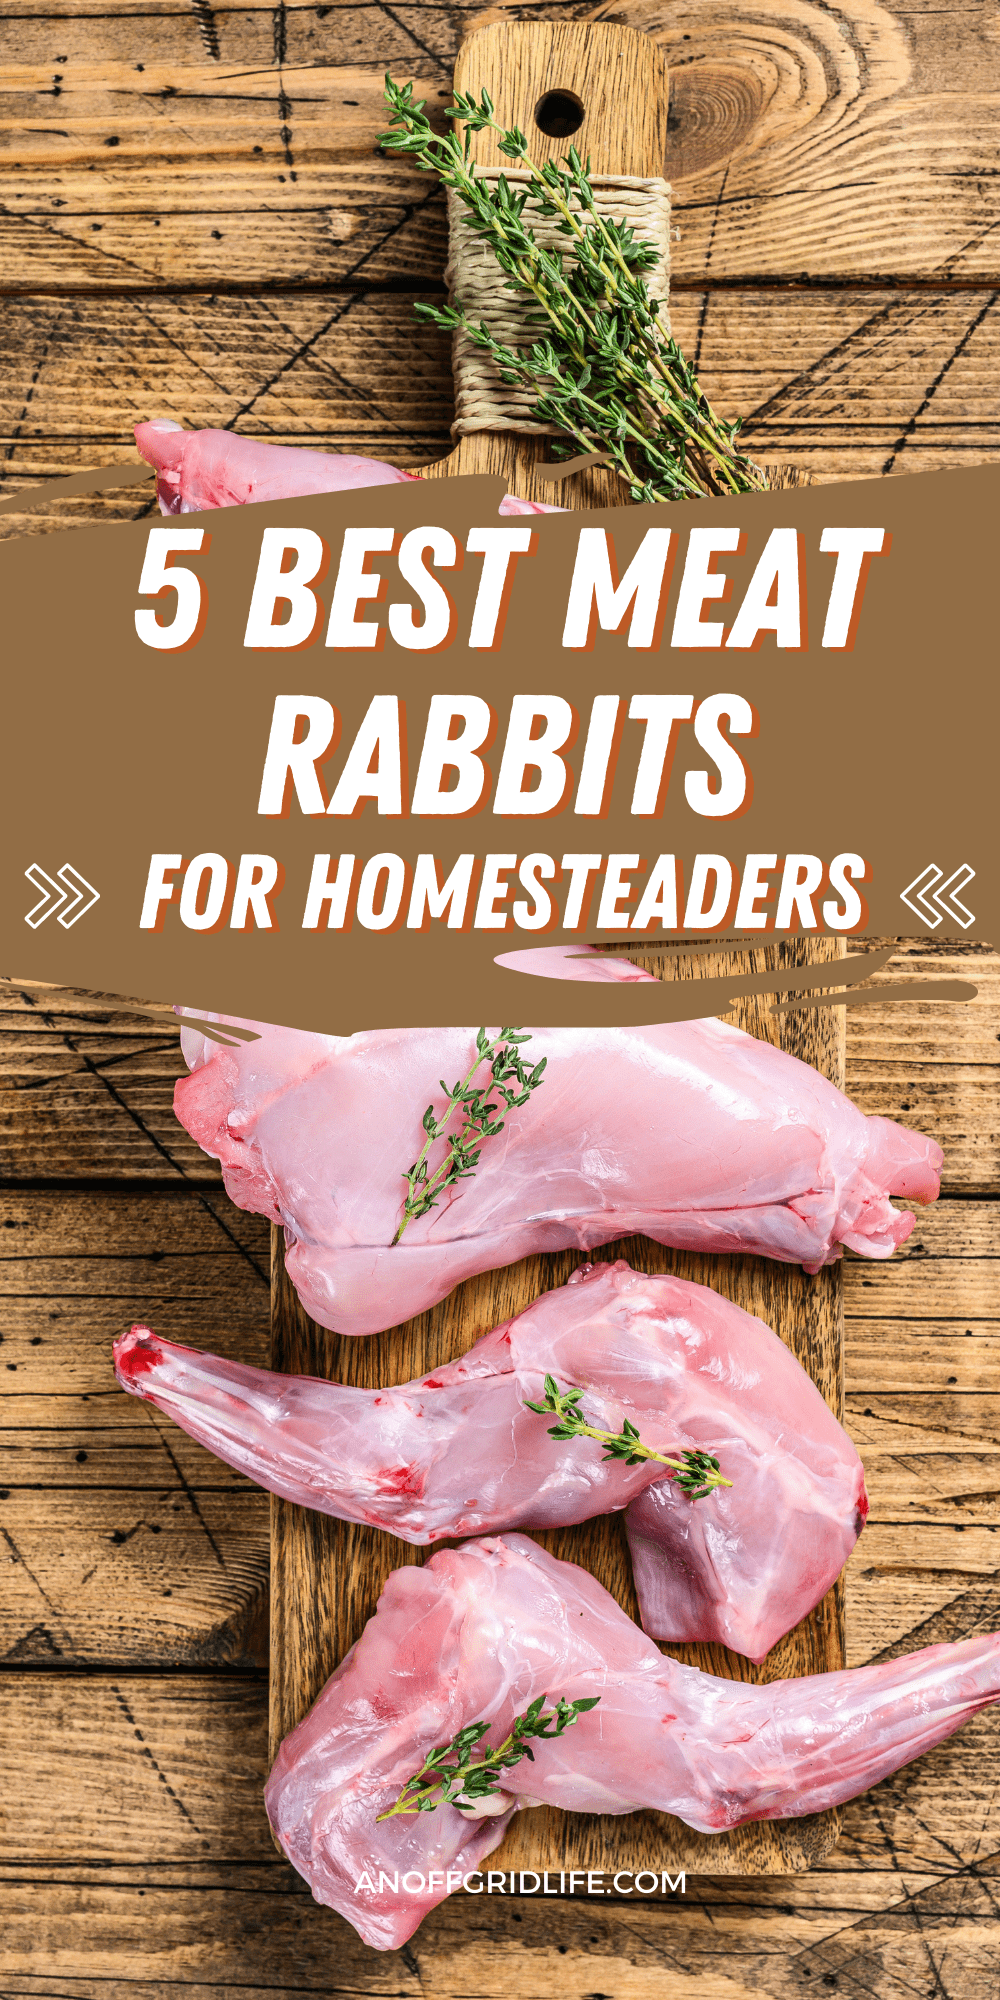 5 Best Meat Rabbits for Homesteaders